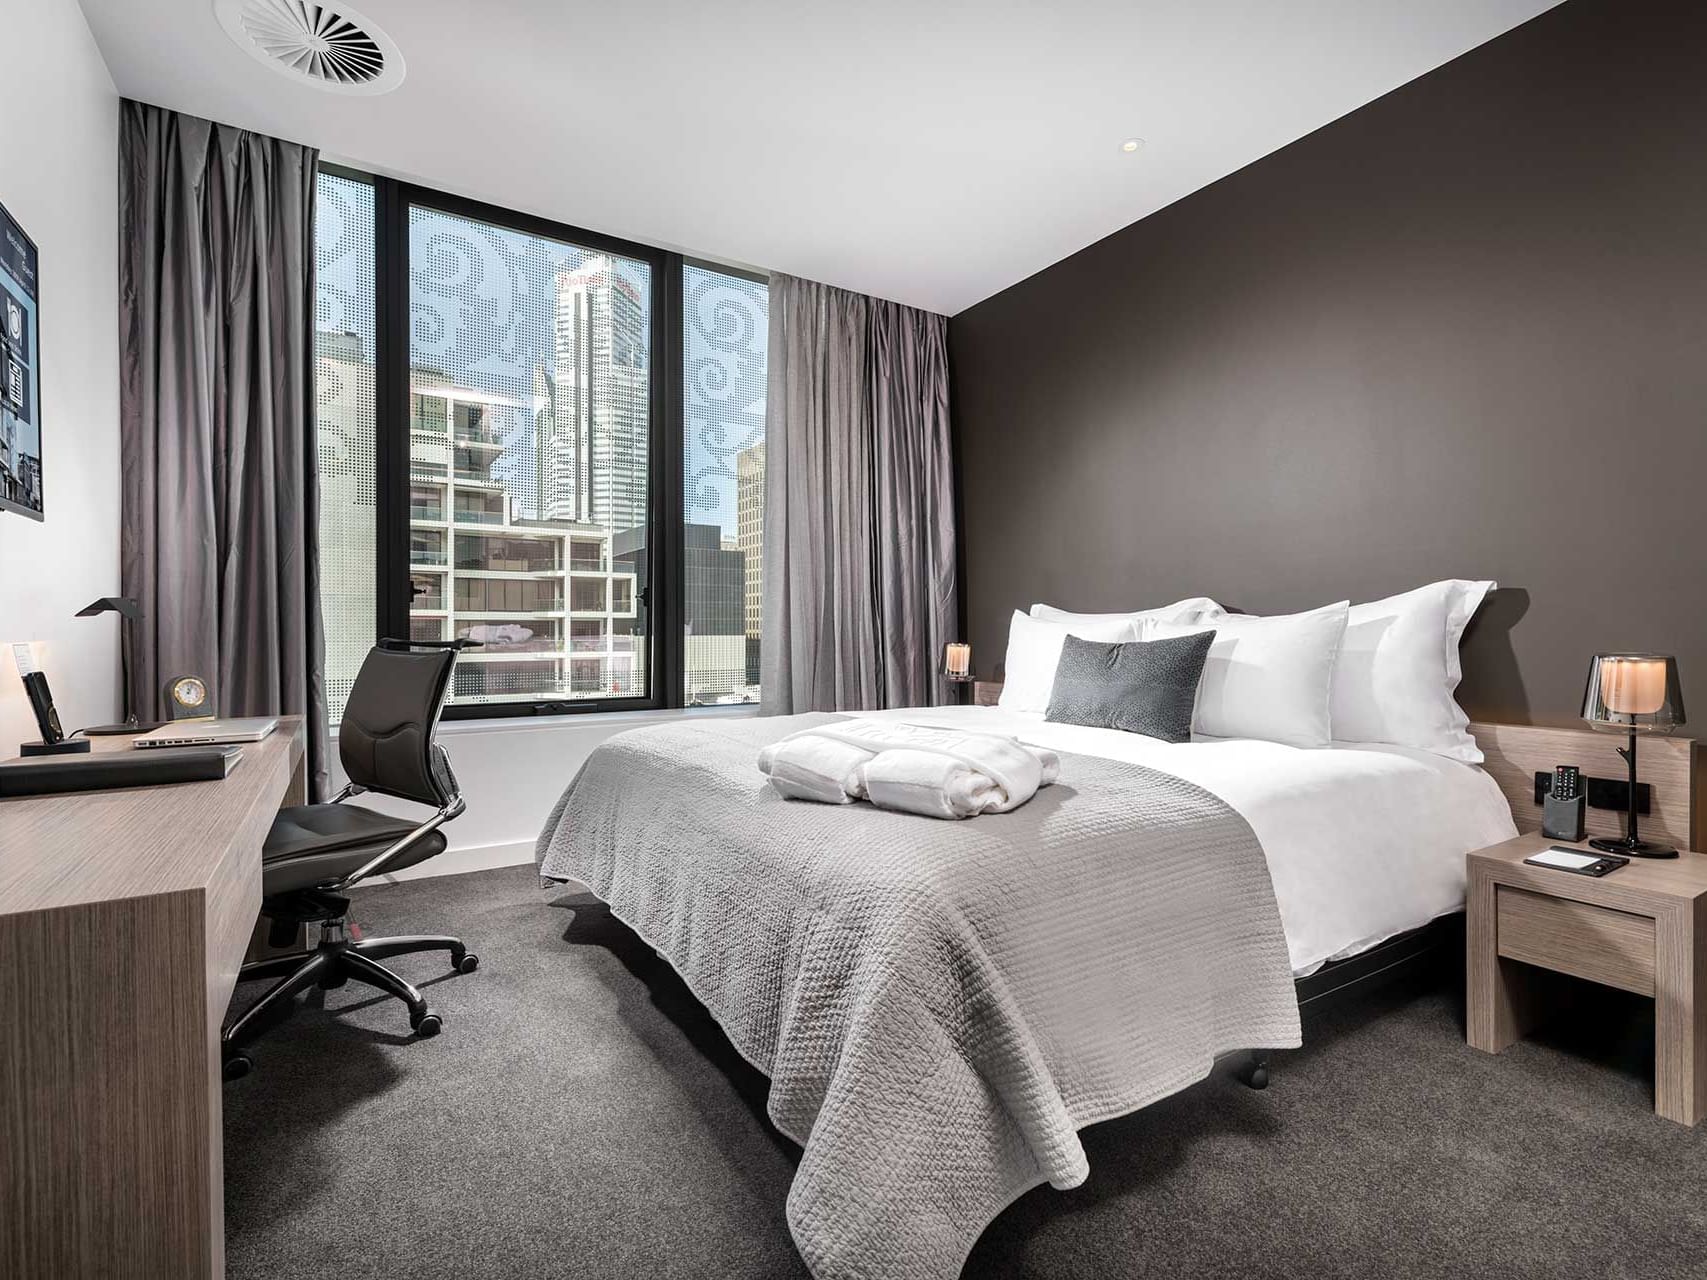 King bed and work area in Contemporary Room with city view at Melbourne Hotel Perth